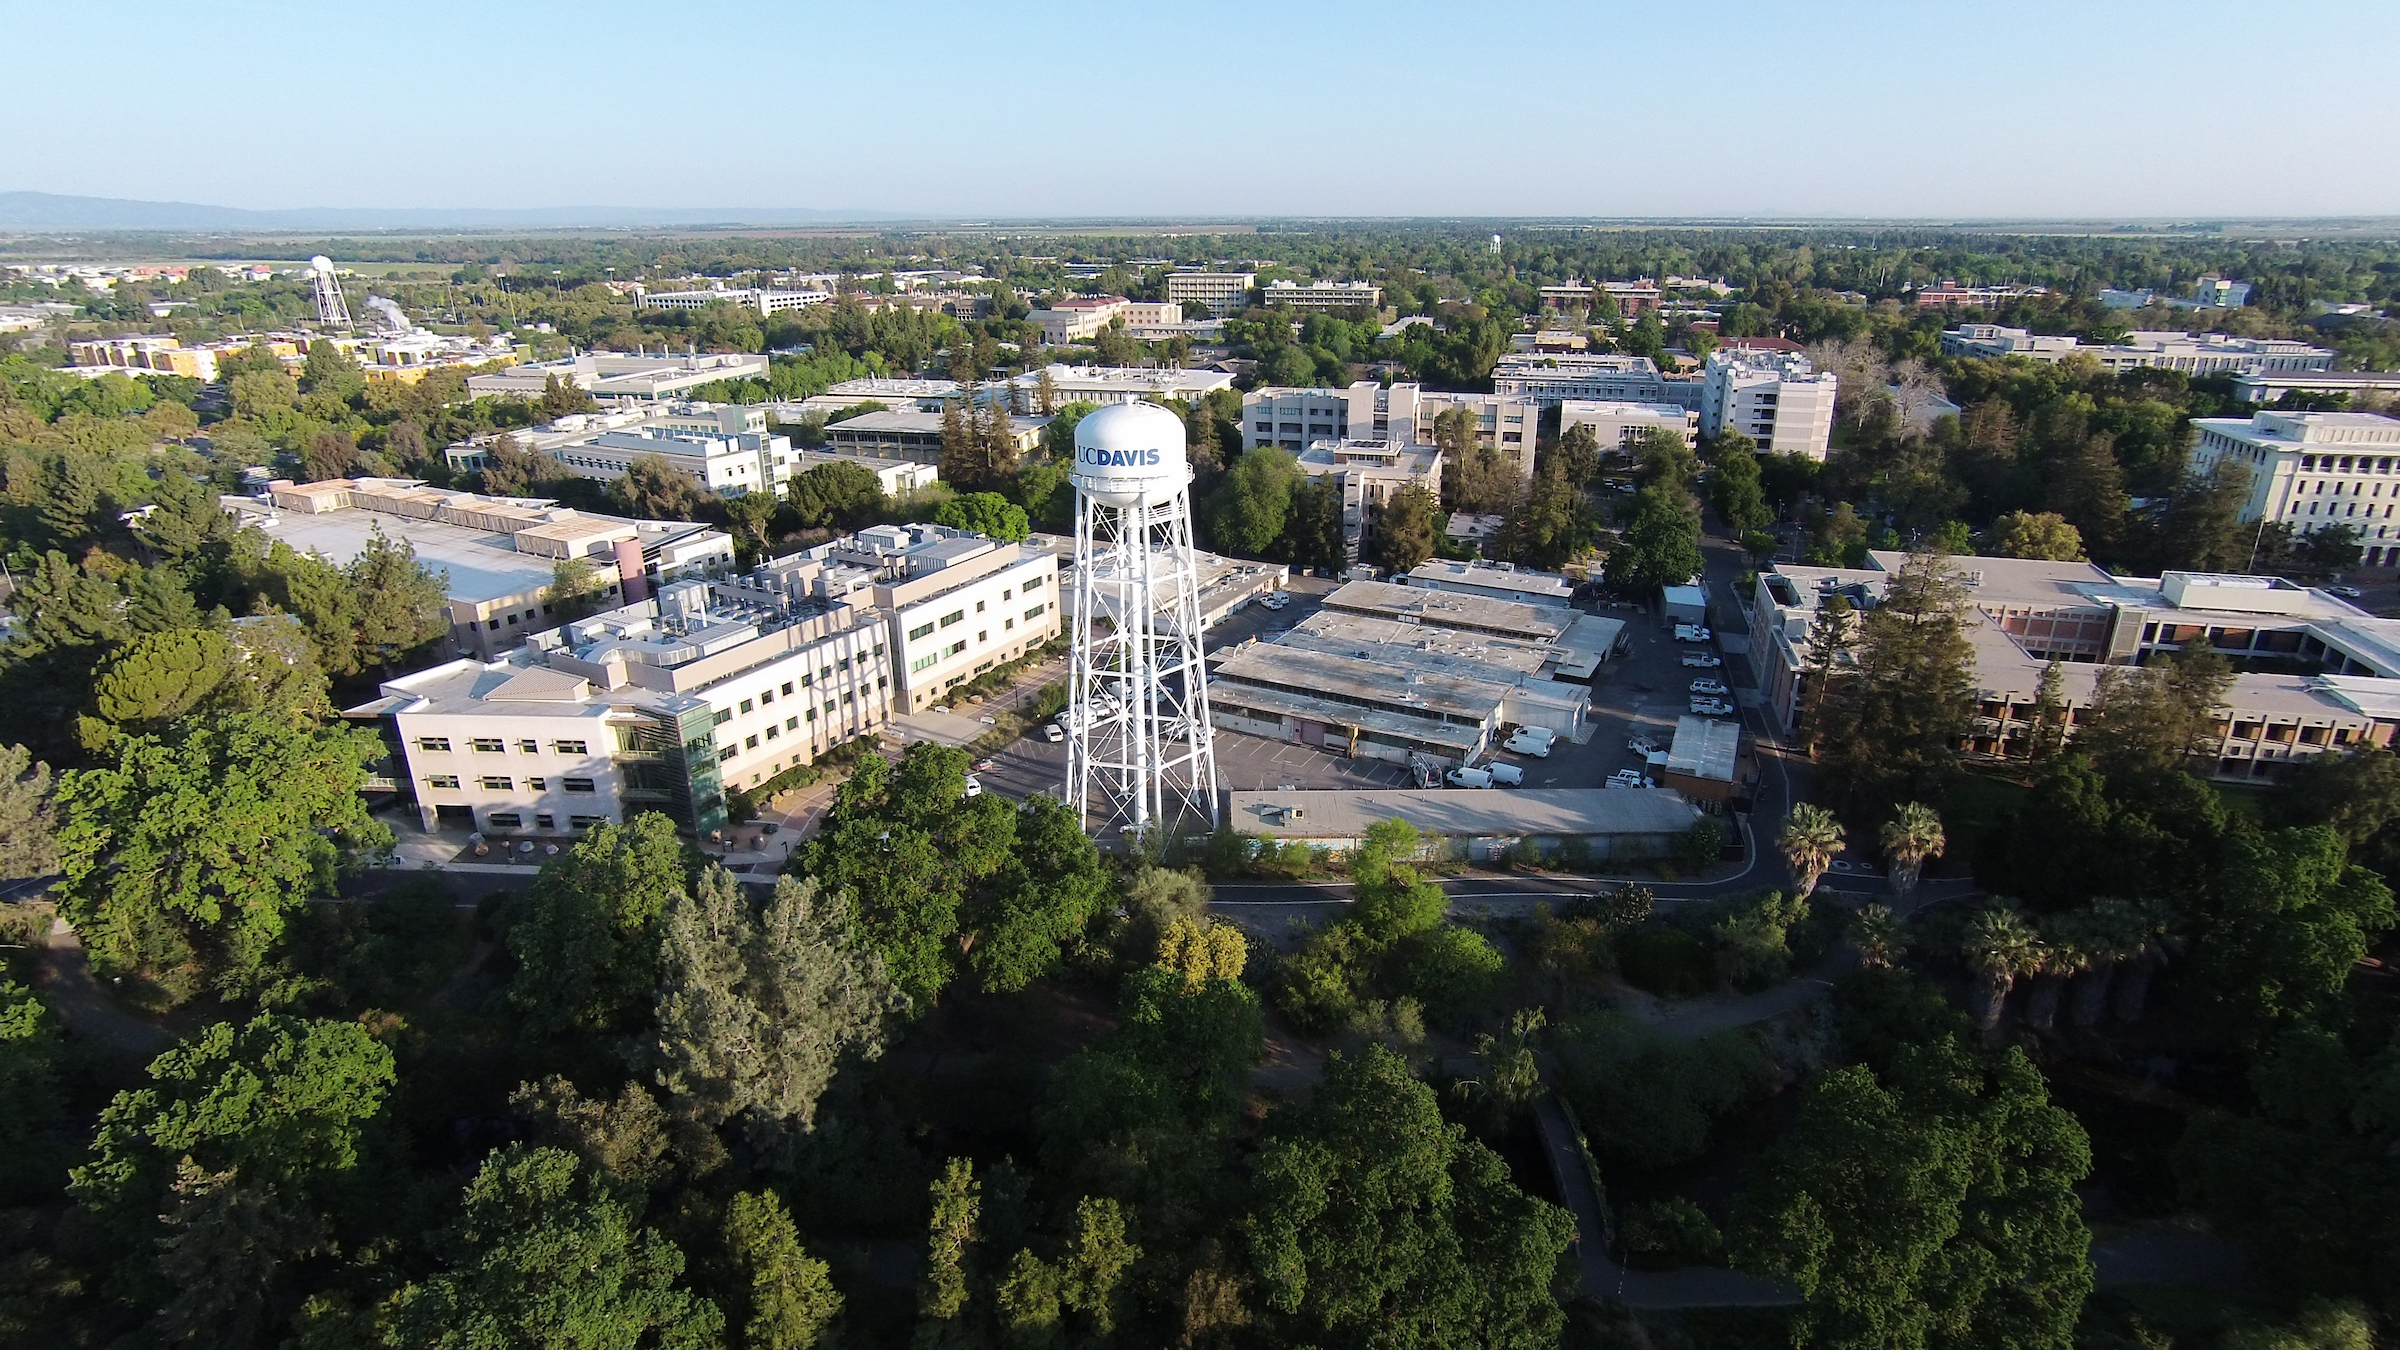 An aerial photo of the UC Davis Campus taken from the south and looking north. The photos shows the south water tower and Mrak Hall. It's a clear day with a blue sky, and trees and other campus buildings are spread out behind.  